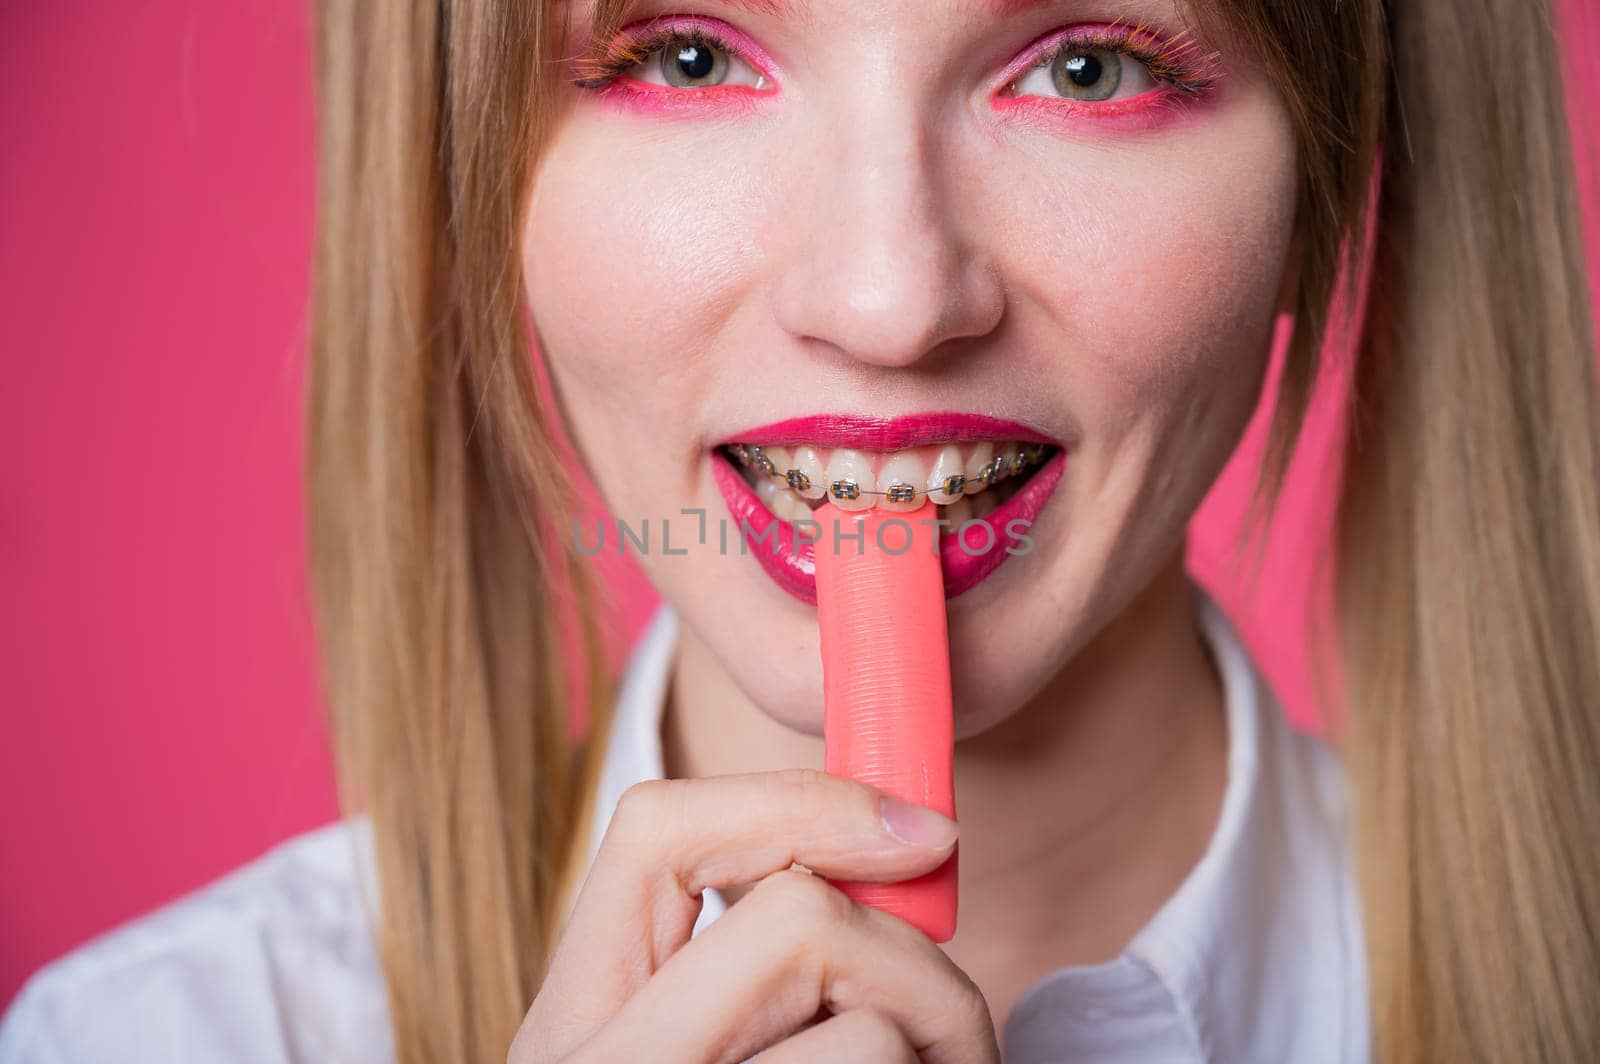 Portrait of a young woman with braces and bright makeup chewing gum on a pink background. by mrwed54